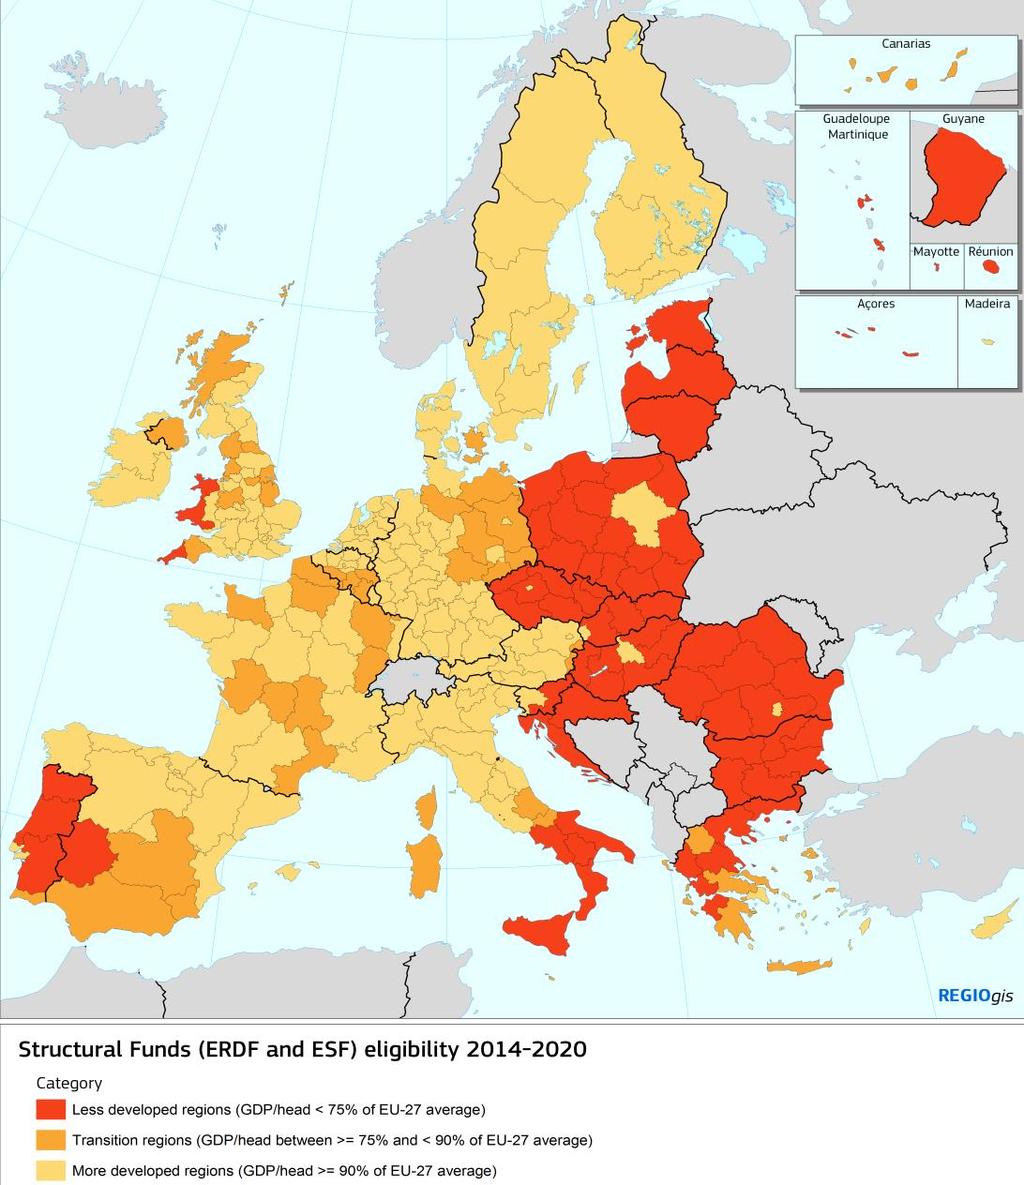 Cohesion Policy Based on EU Treaty and aiming at 'economic, social and territorial cohesion' and 'reducing disparities' Major reform for the 2014-2020 period and alignment with Europe 2020